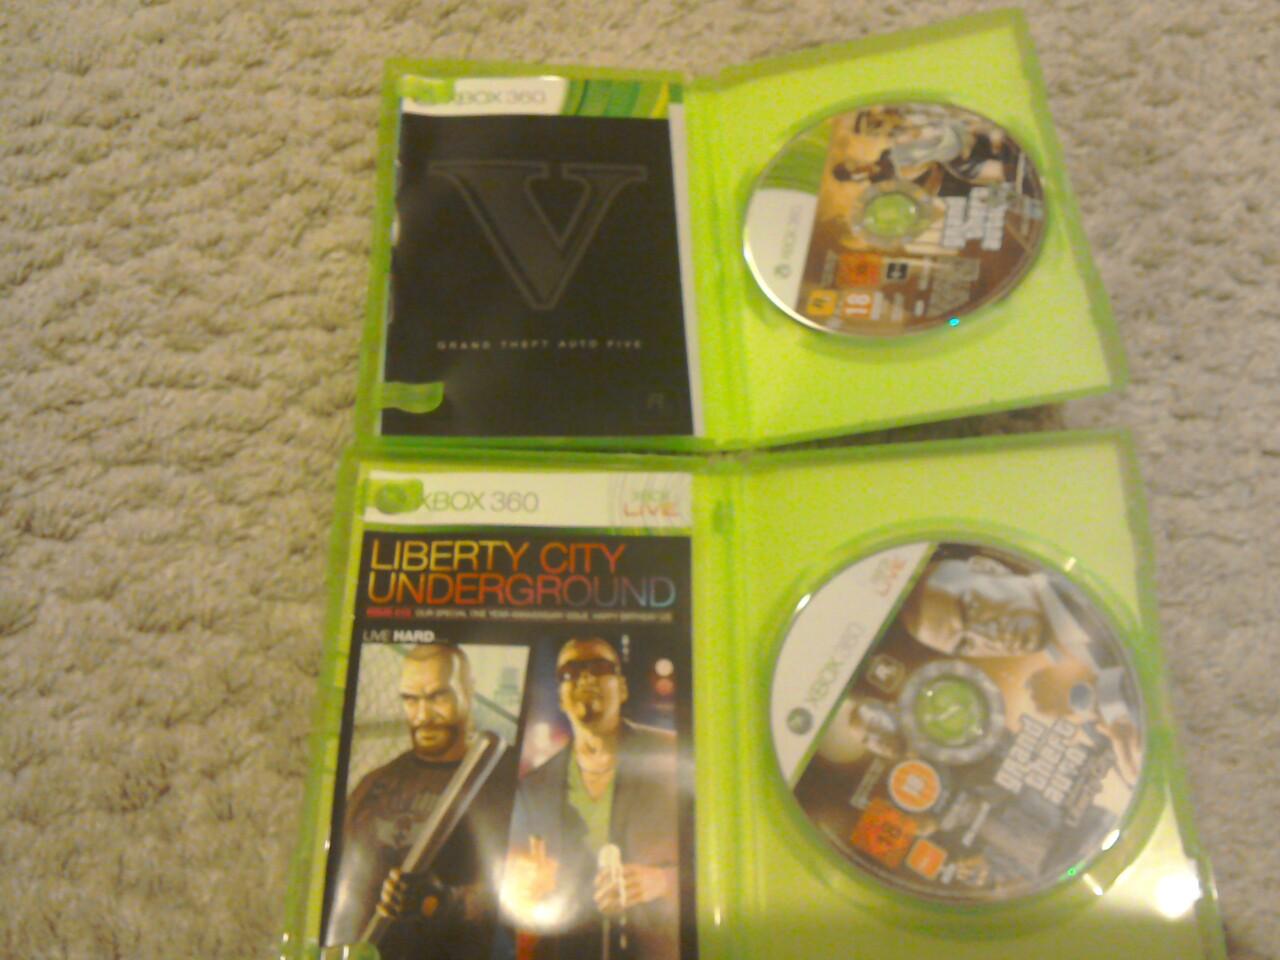 gta-5-and-gta-episodes-from-lc-for-xbox-360-in-dy1-dudley-for-12-00-for-sale-shpock